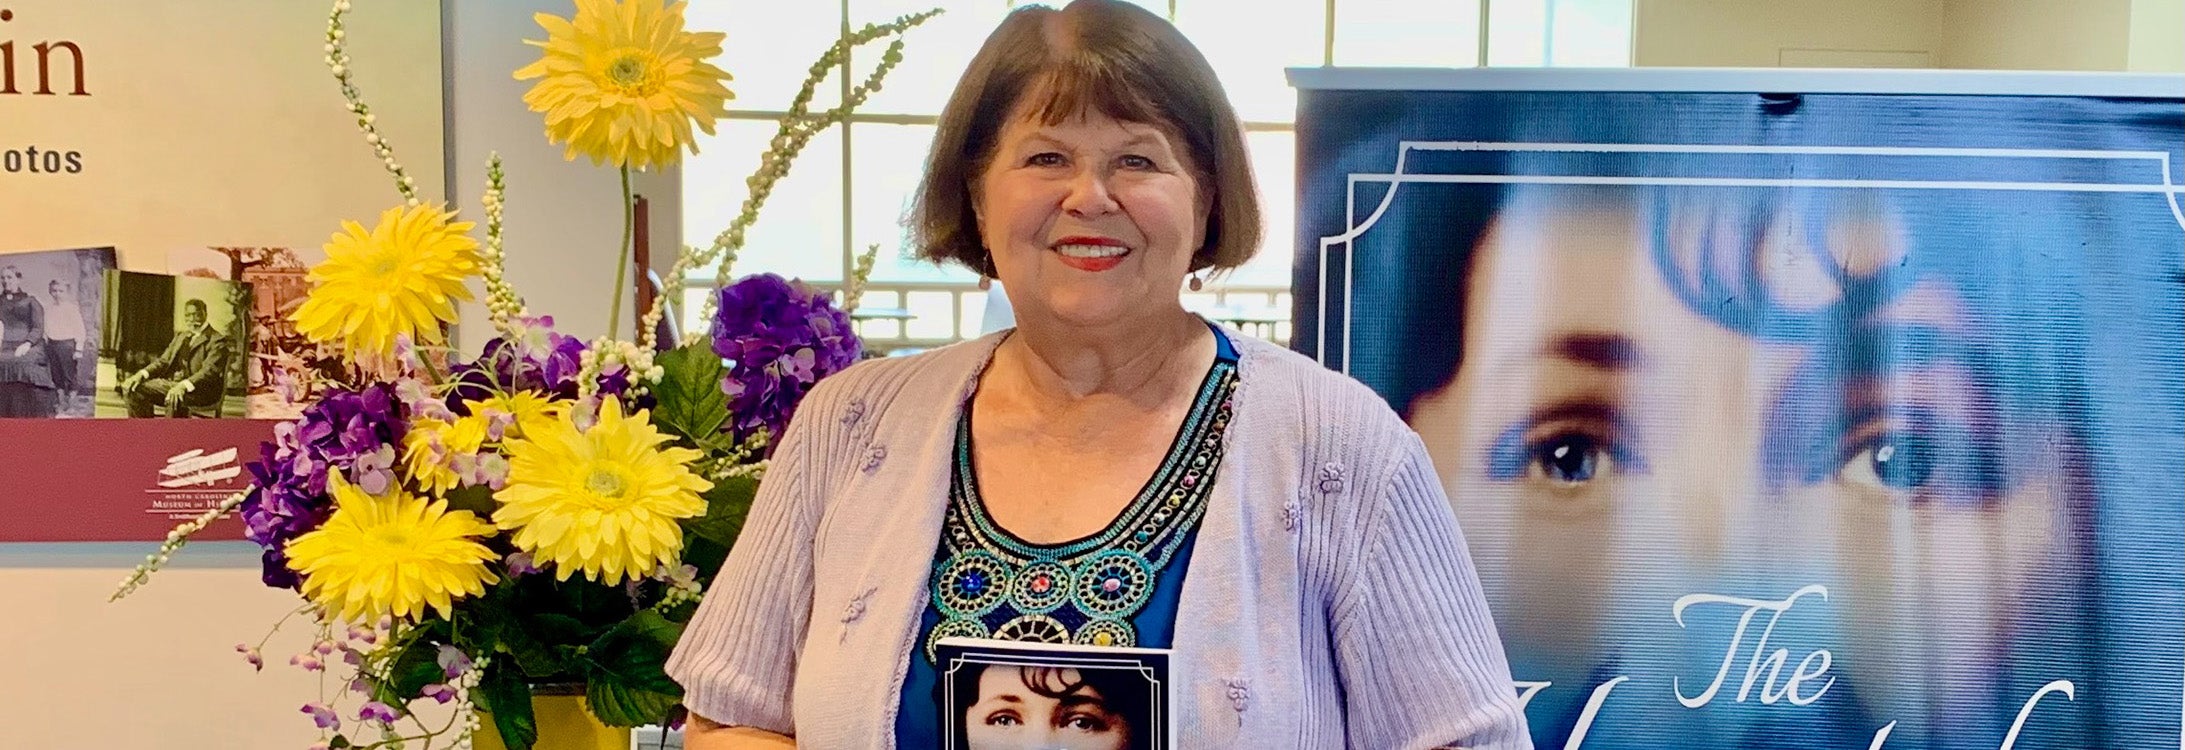 Donna Flake is pictured at the Janice Hardison Faulkner Gallery entrance for a reading of “The Haunted Life of Lura.” (Photo by Ronnie Woodward)